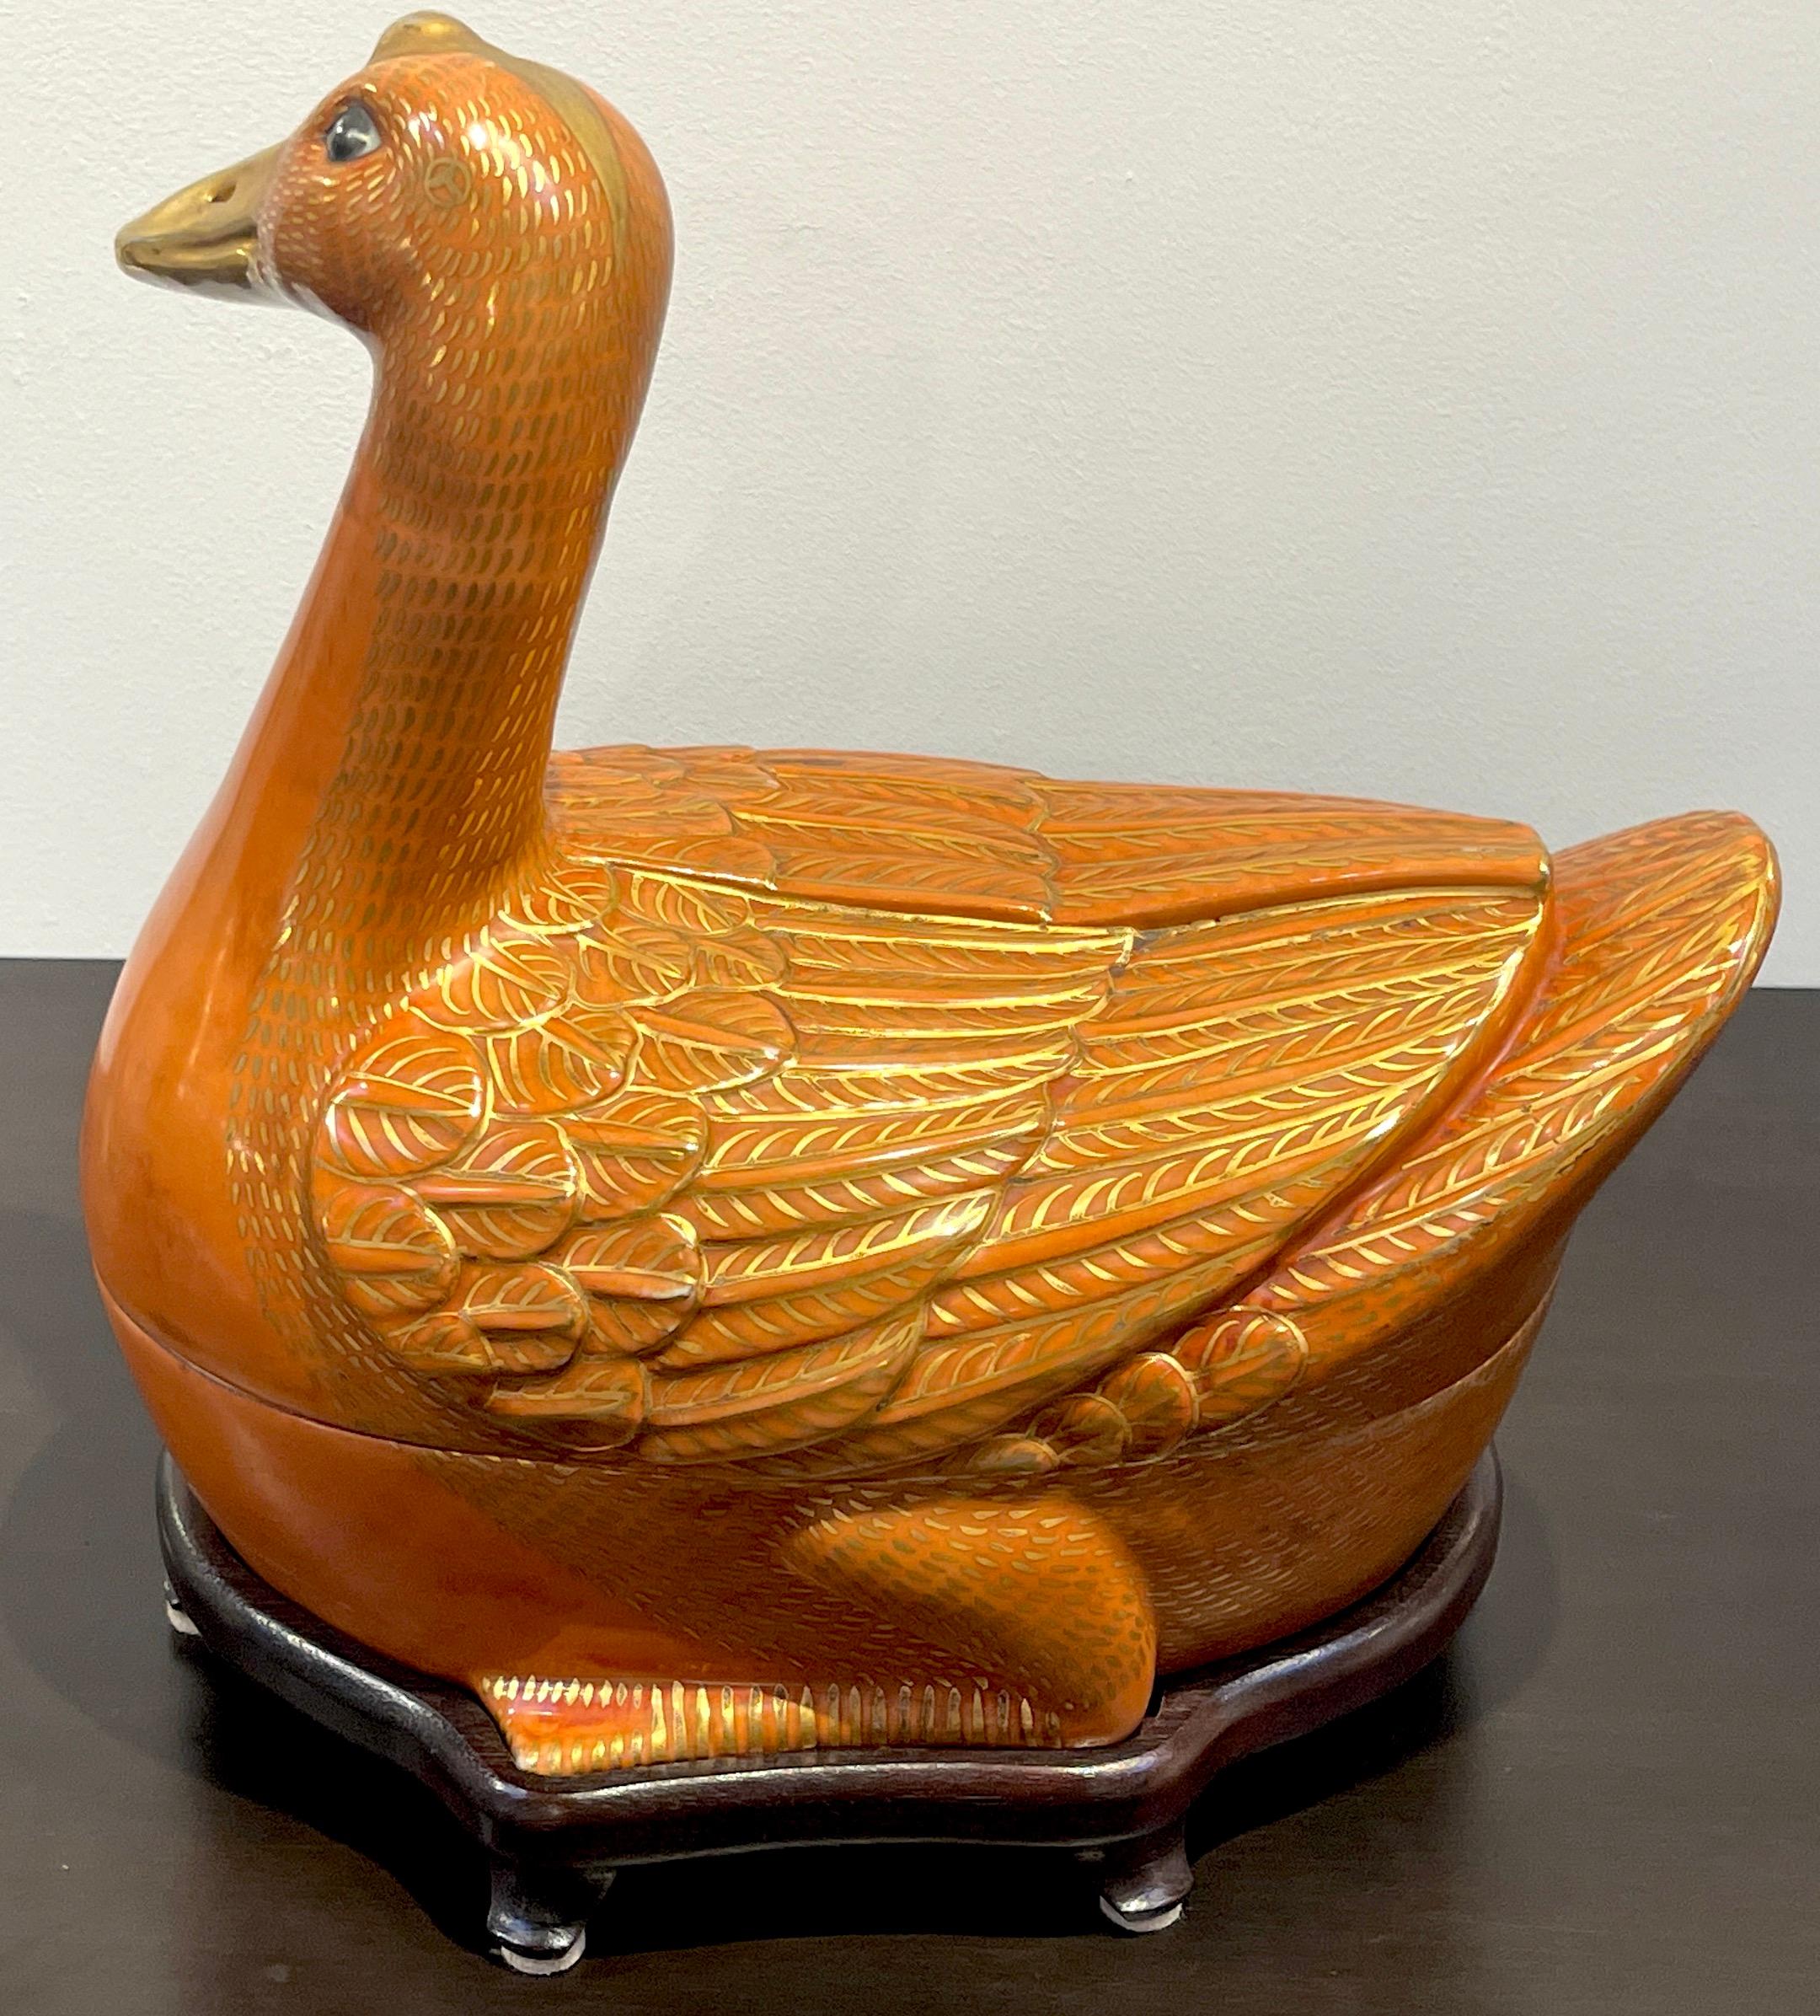 20th Century Chinese Export Porcelain Figural Iron Red and Gilt Duck Tureen & Stand